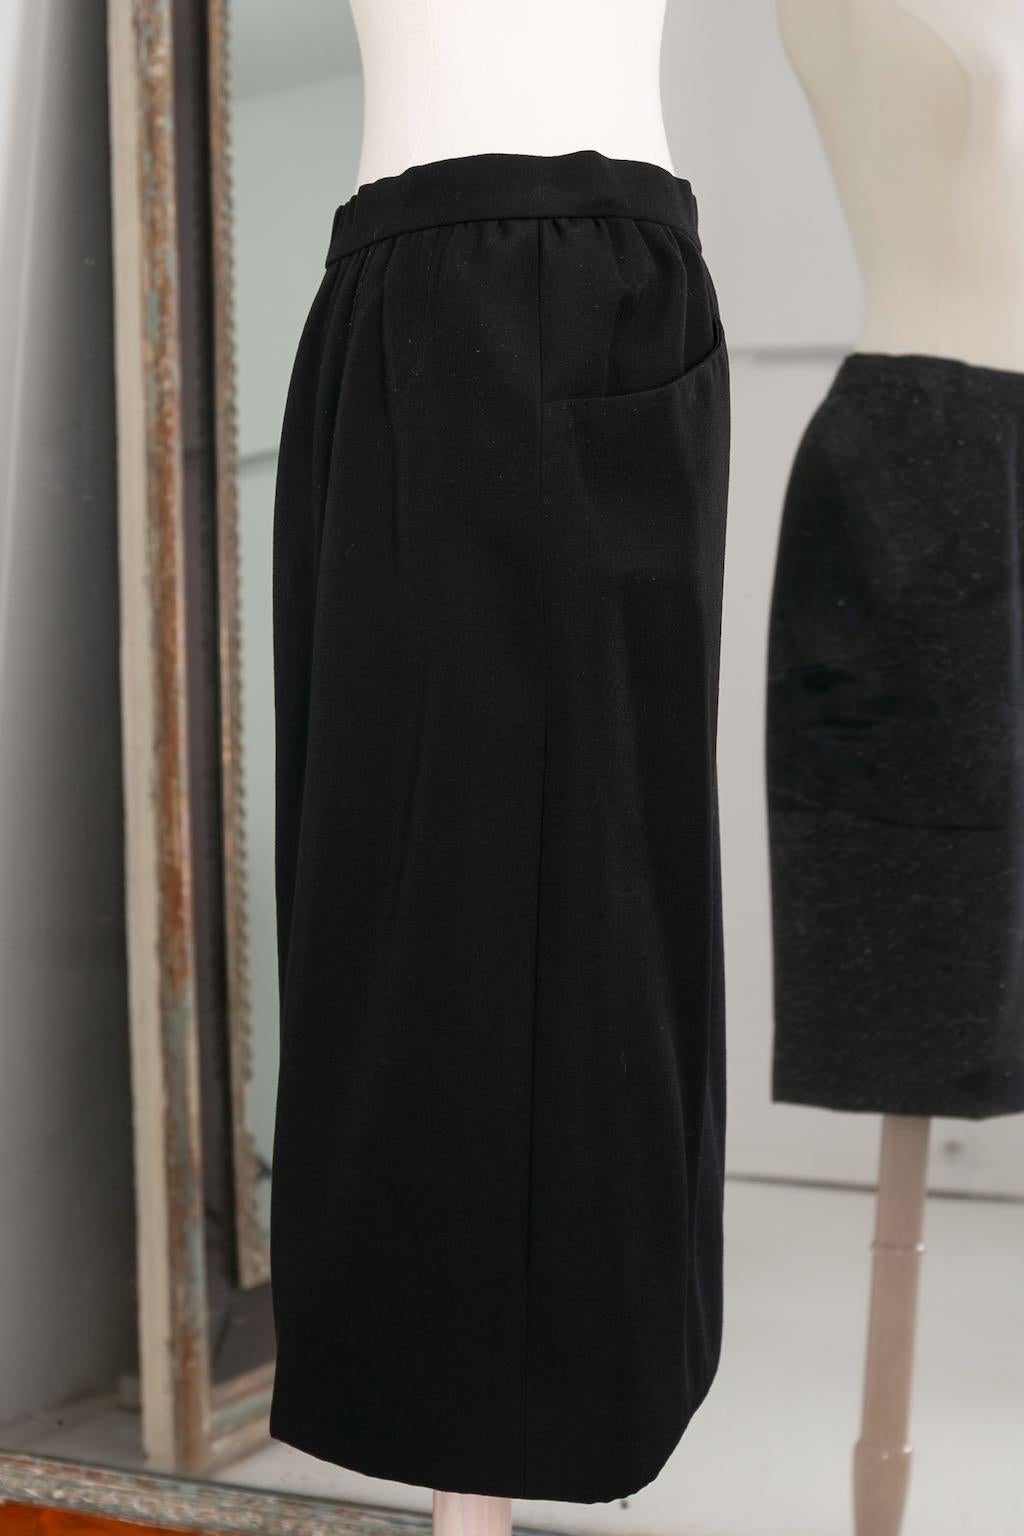 Yves Saint Laurent Haute Couture Black Skirt and Jacket Set, circa 1981/1982 For Sale 6